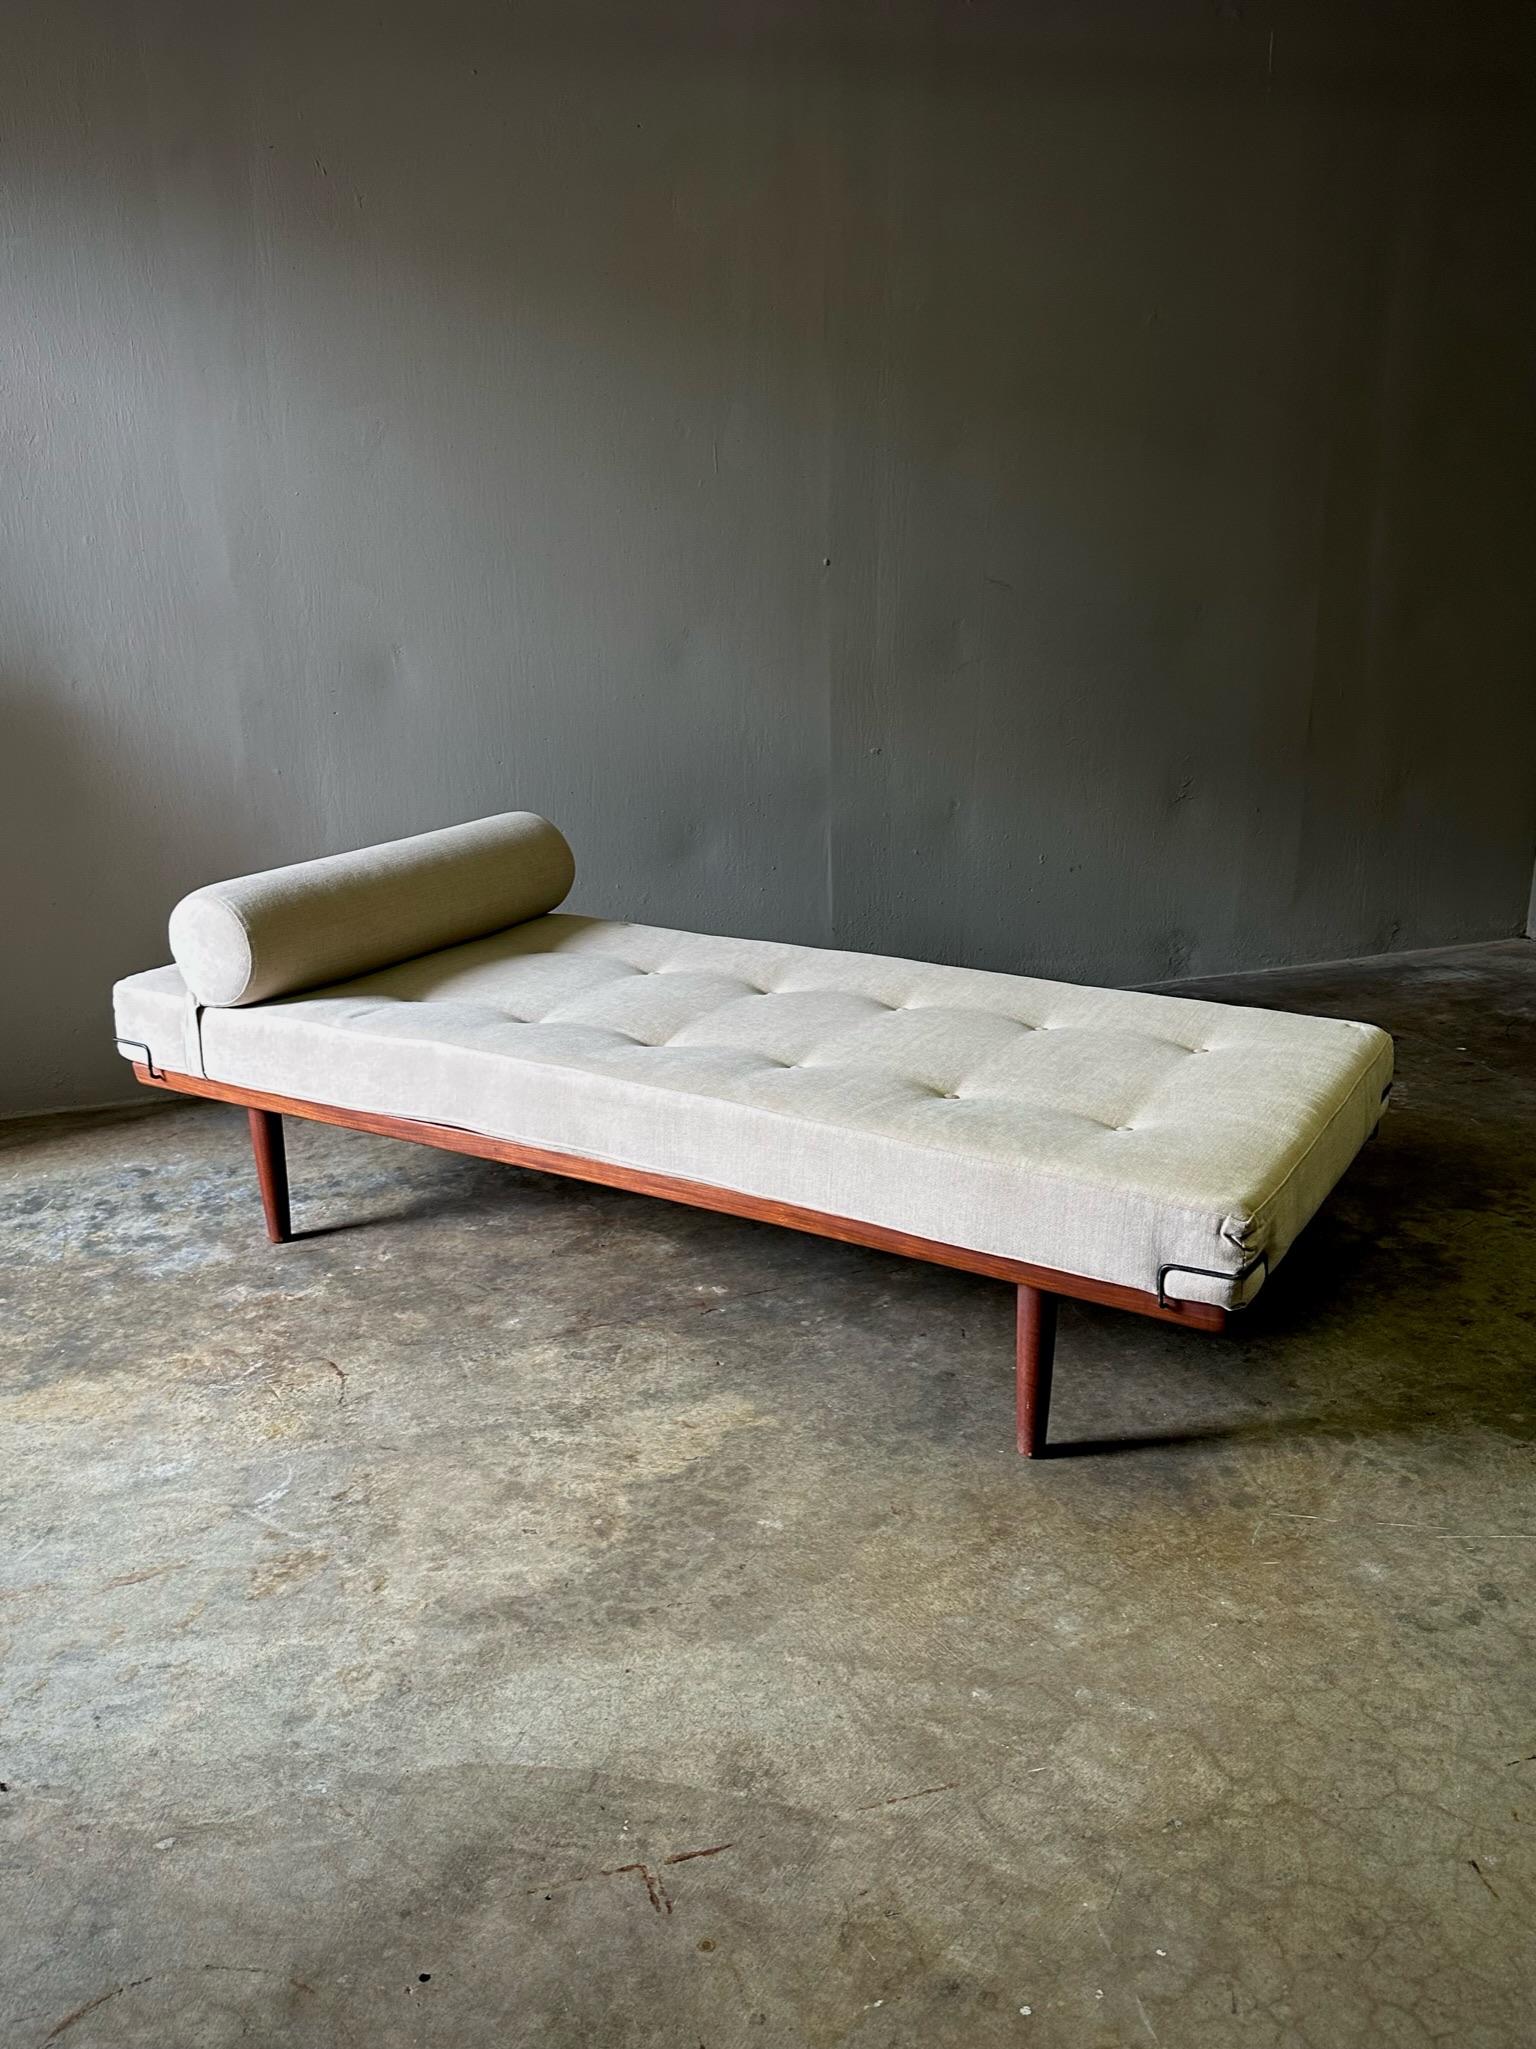 Rare Danish midcentury daybed by Frem Rojle, with sleek modern lines, wood base and ecru upholstered seat cushion with bolster pillow. Sensuous yet minimal. 